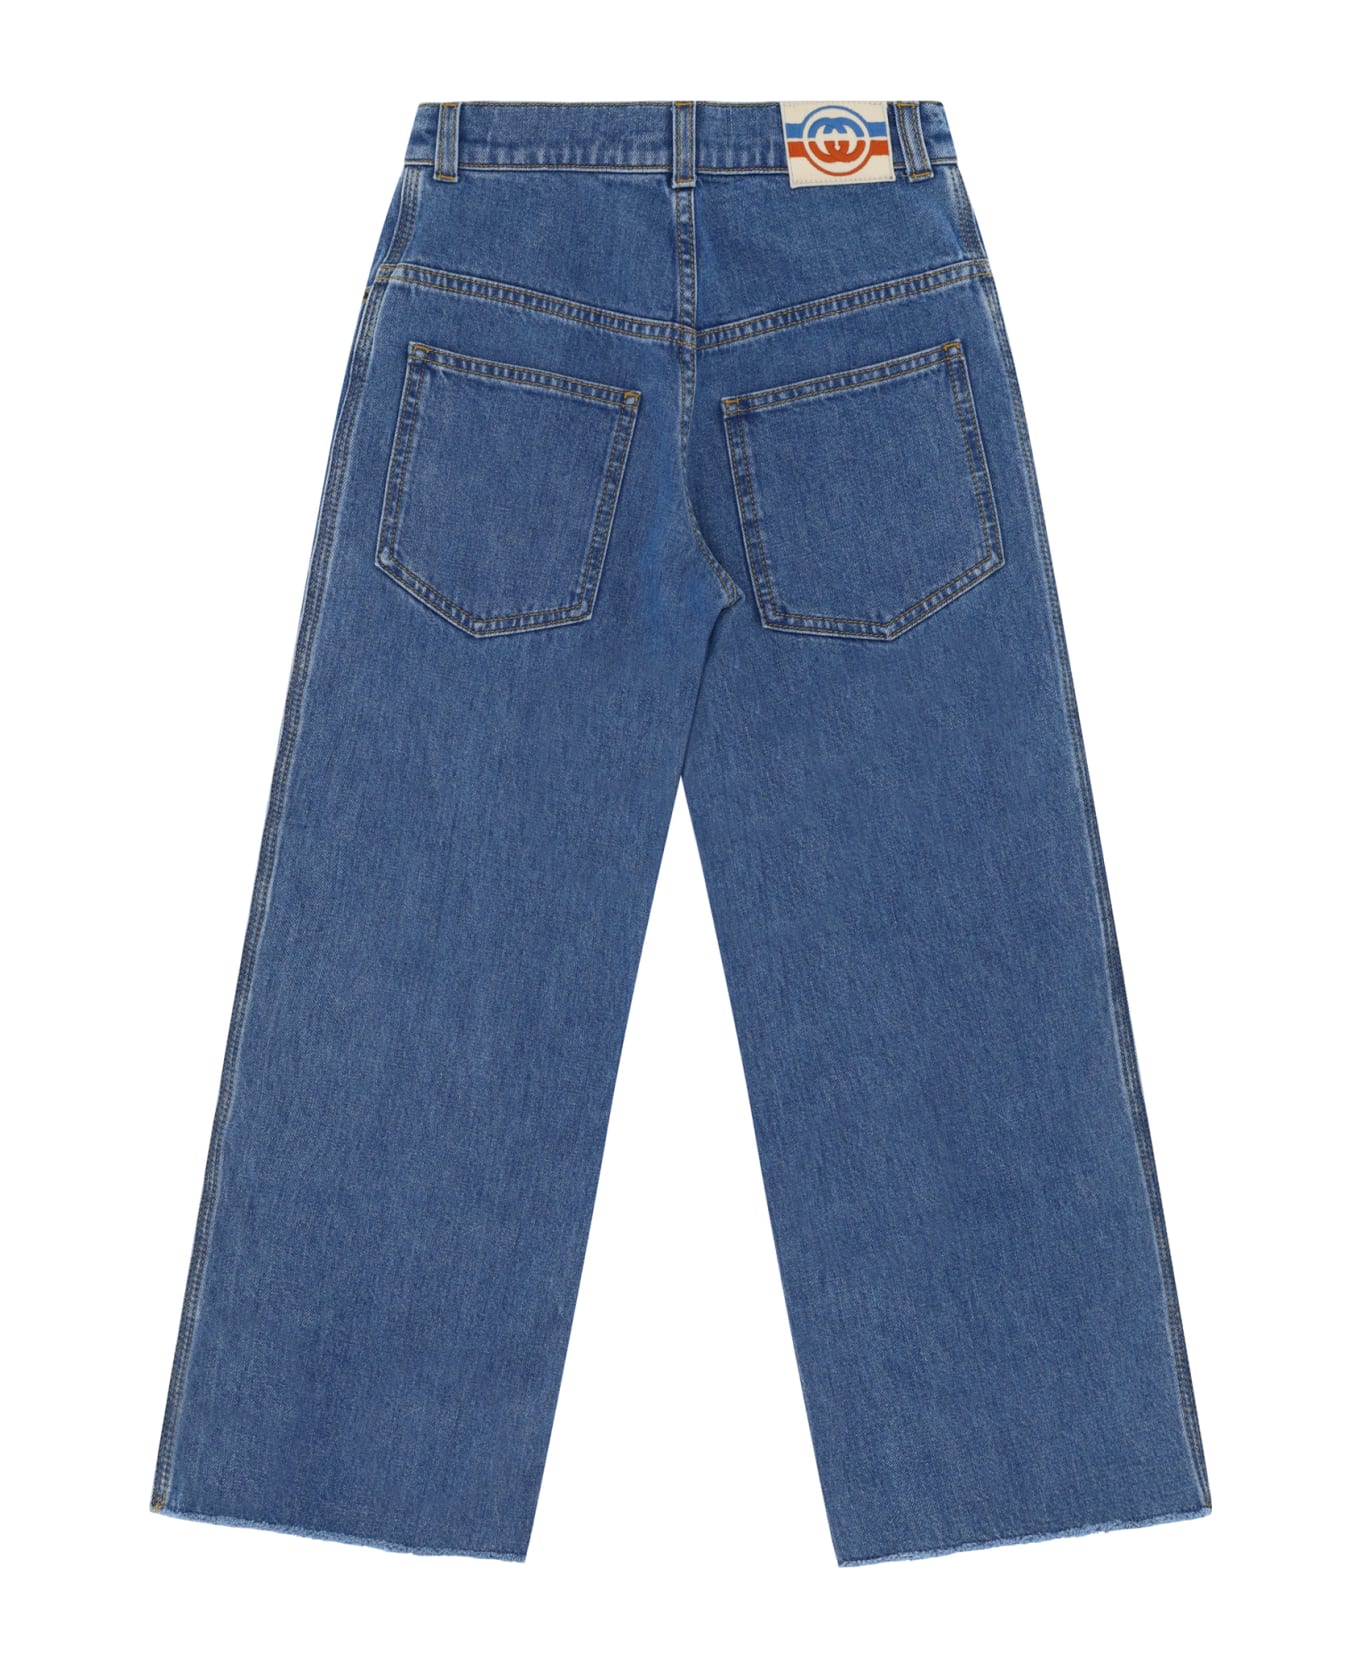 Gucci Jeans For Boy - Blue/mix ボトムス